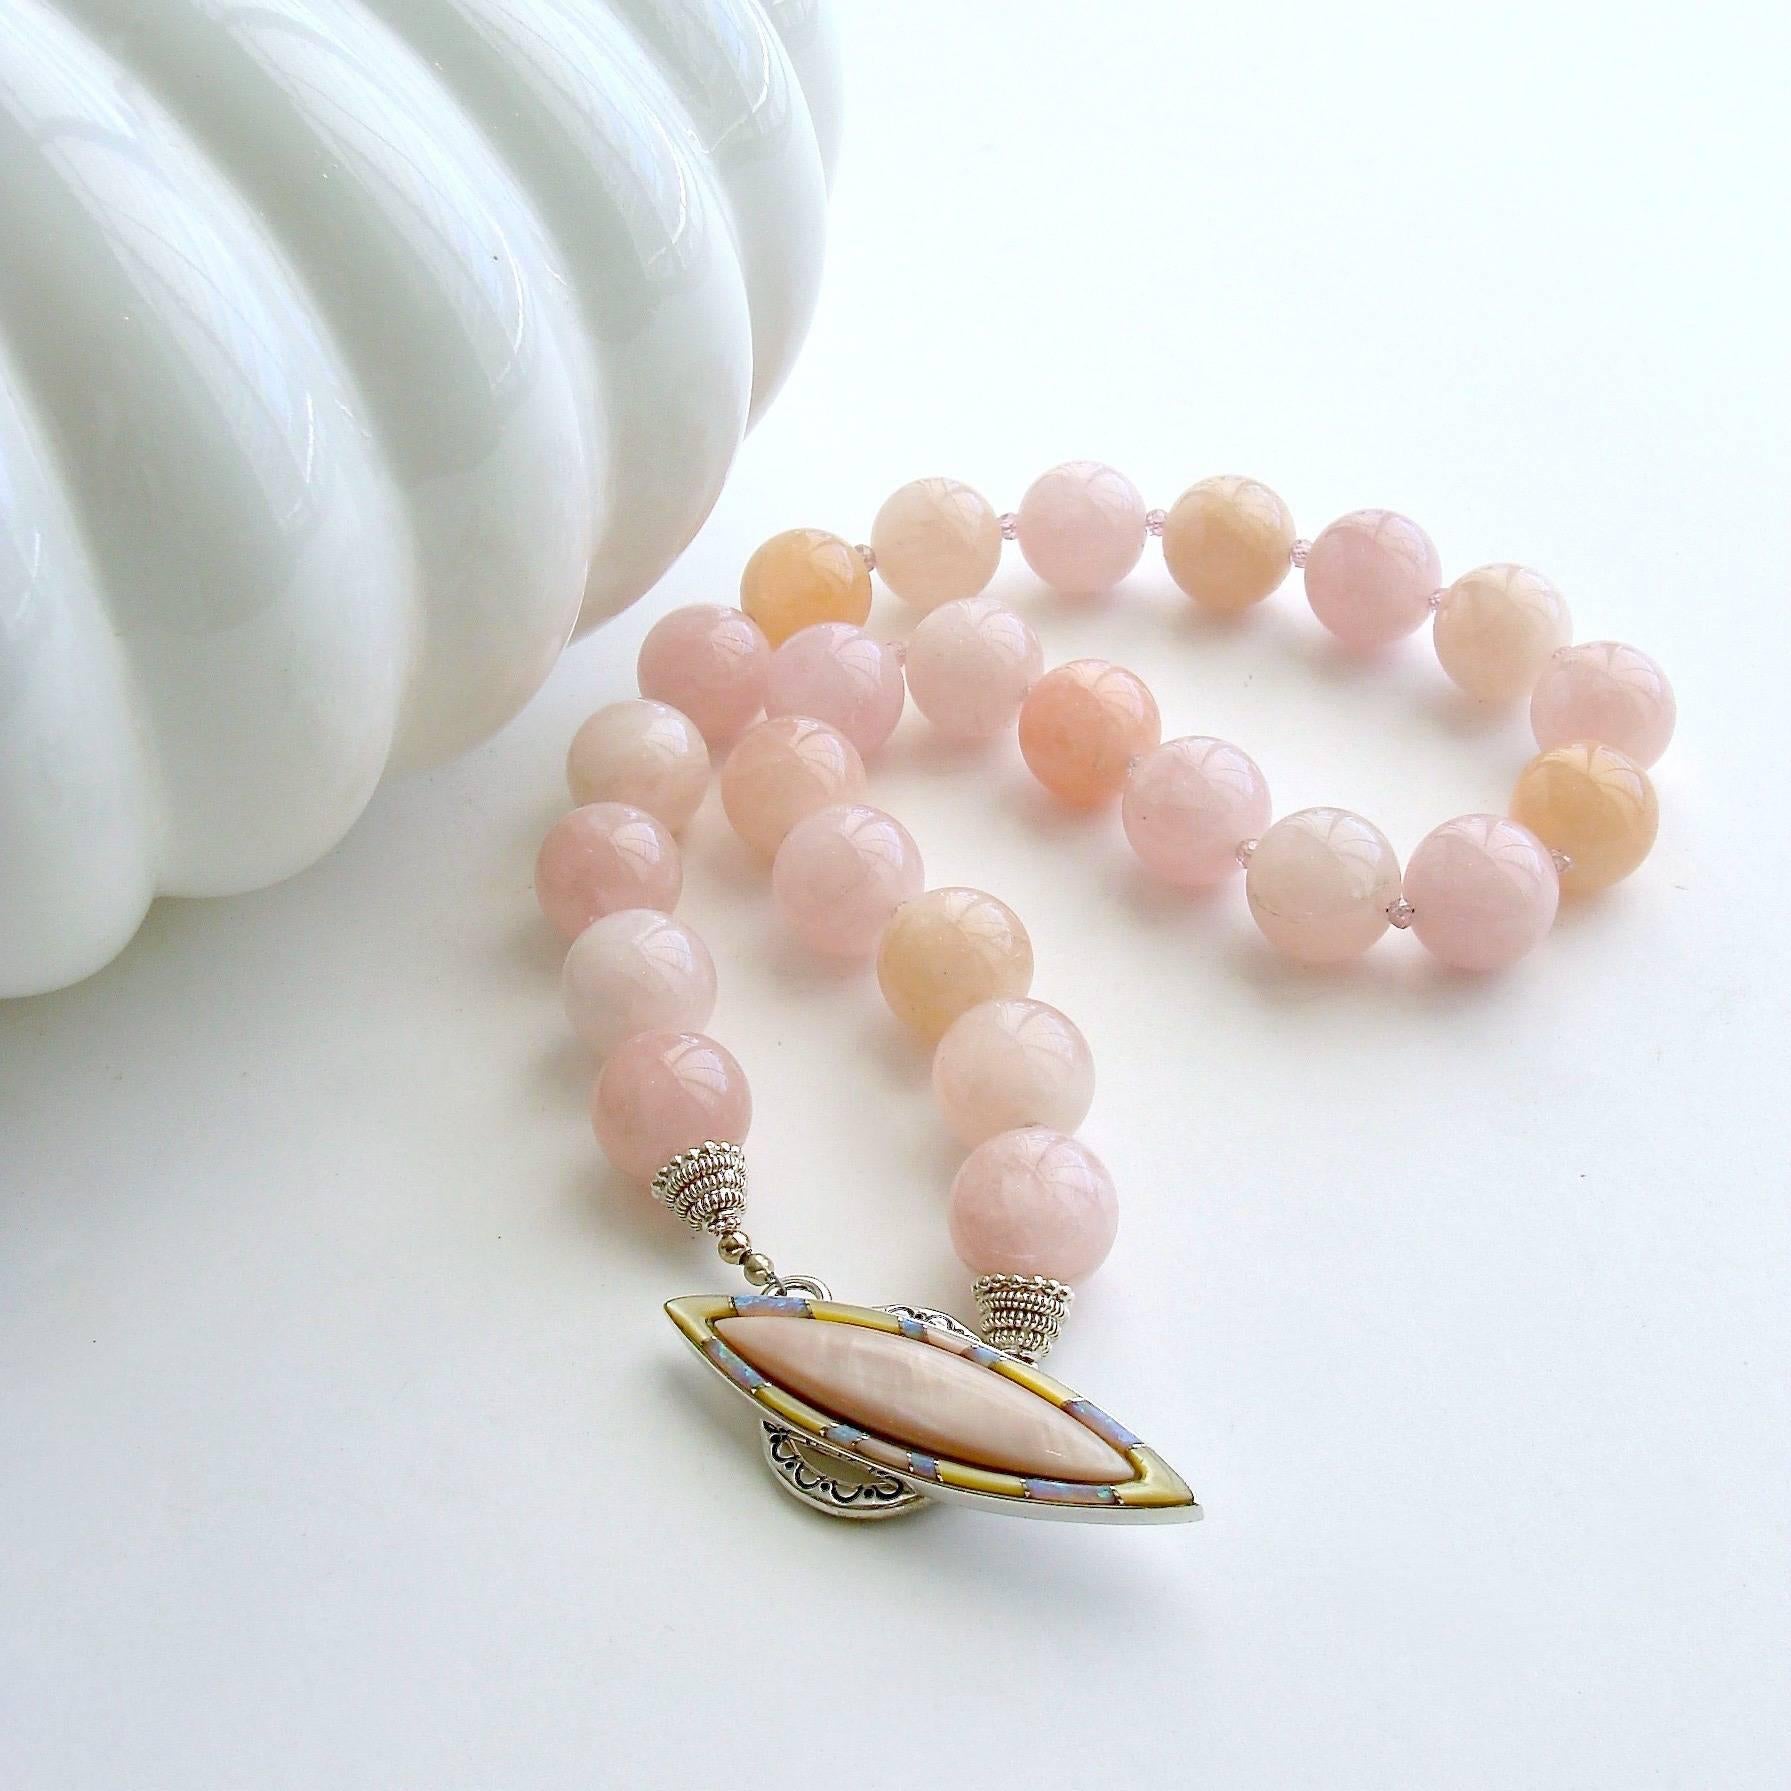 Dahlia III Necklace.

Varying shades of blush pink and pink grapefruit colored luxe morganite beryl beads are gently separated by pink zircon faceted rondelles to create a bountiful statement choker necklace designed to celebrate spring and summer